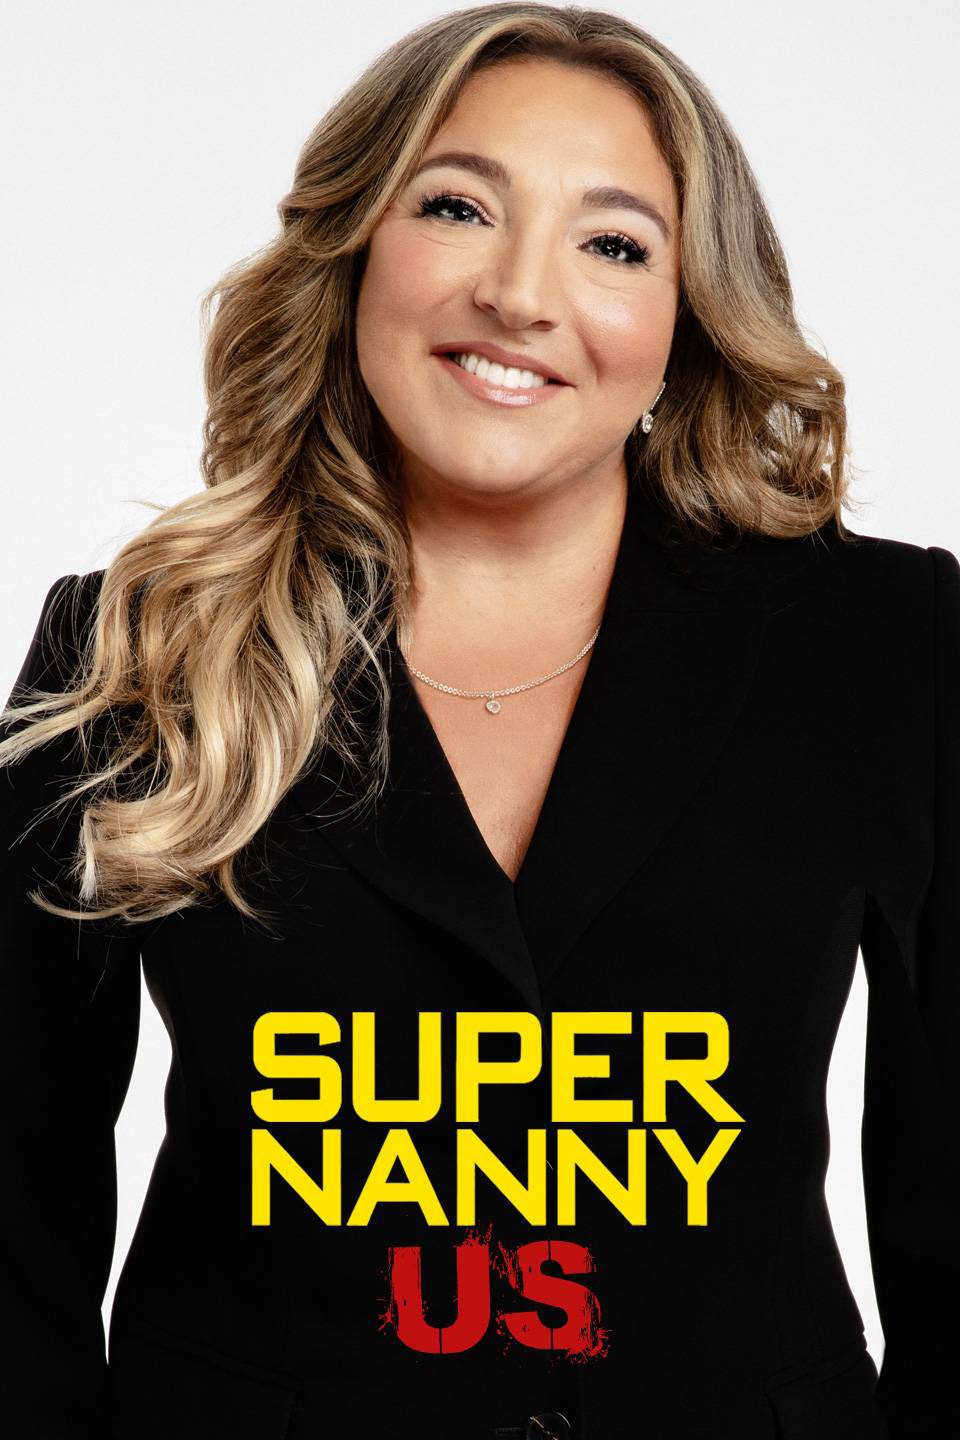 Woman who punched Supernanny when she was 9 spoke out about experience on  show years later